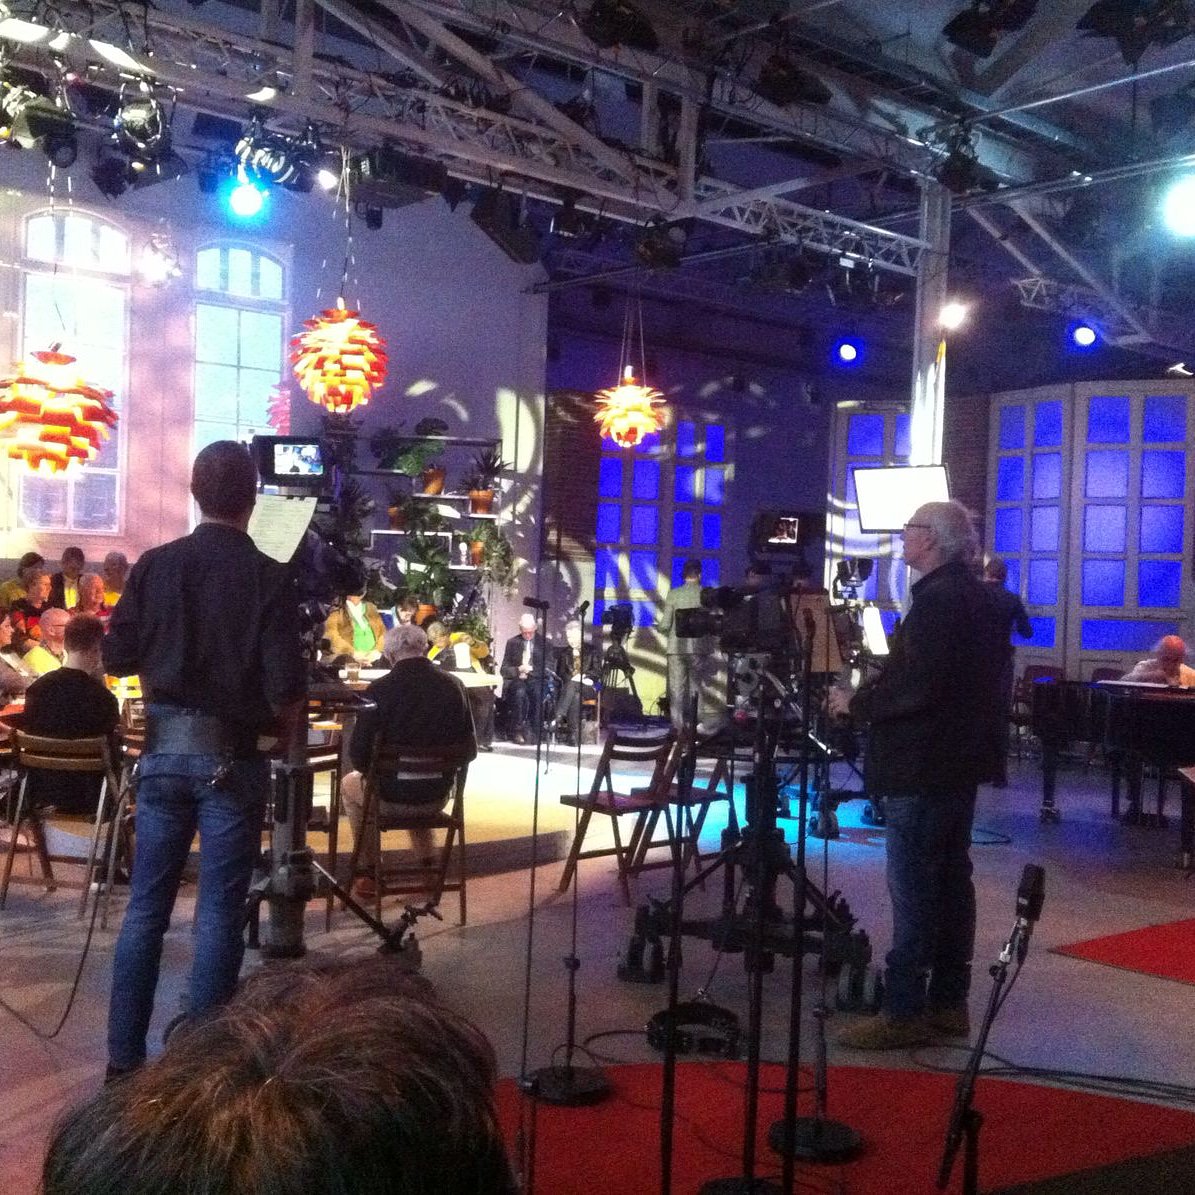 At the #live #recording of @PodiumWitteman @DeHallenStudios #Amsterdam with #special #guests #CarelKraayenhof #EllyAmeling and #RaoulSteffani #classicalmusic #television #show #awesome